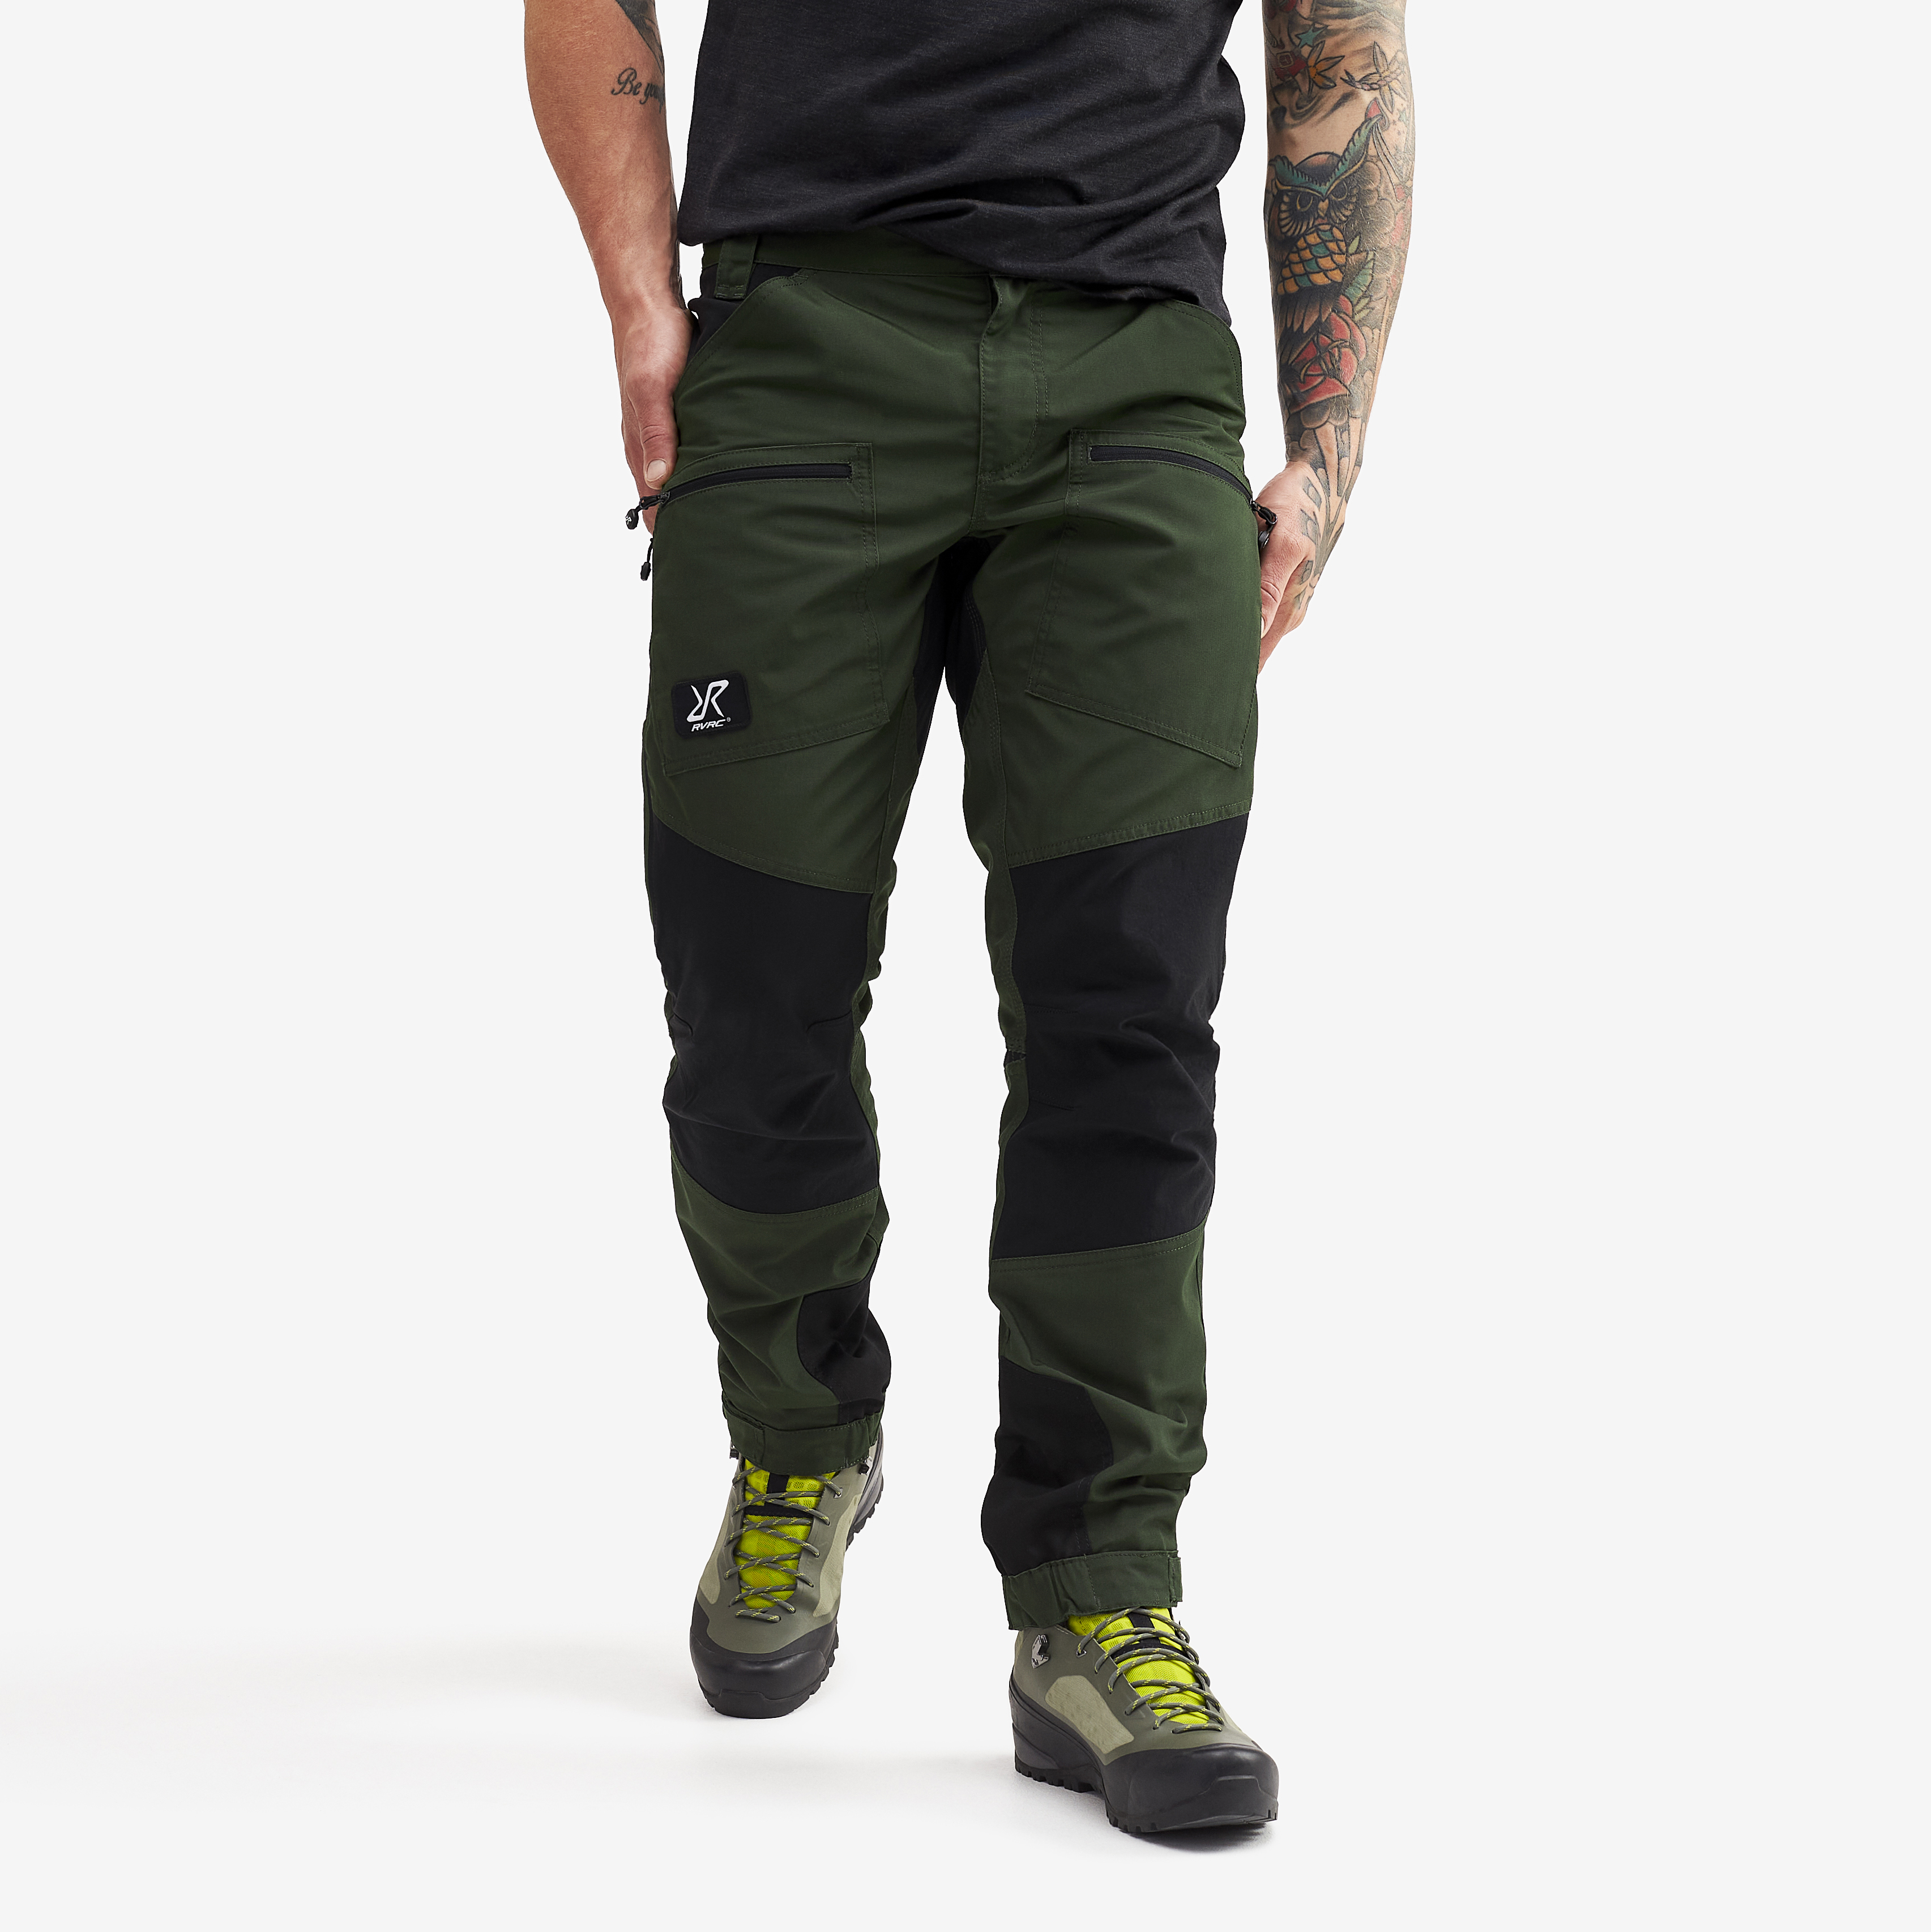 Nordwand Pro Short hiking trousers for men in green